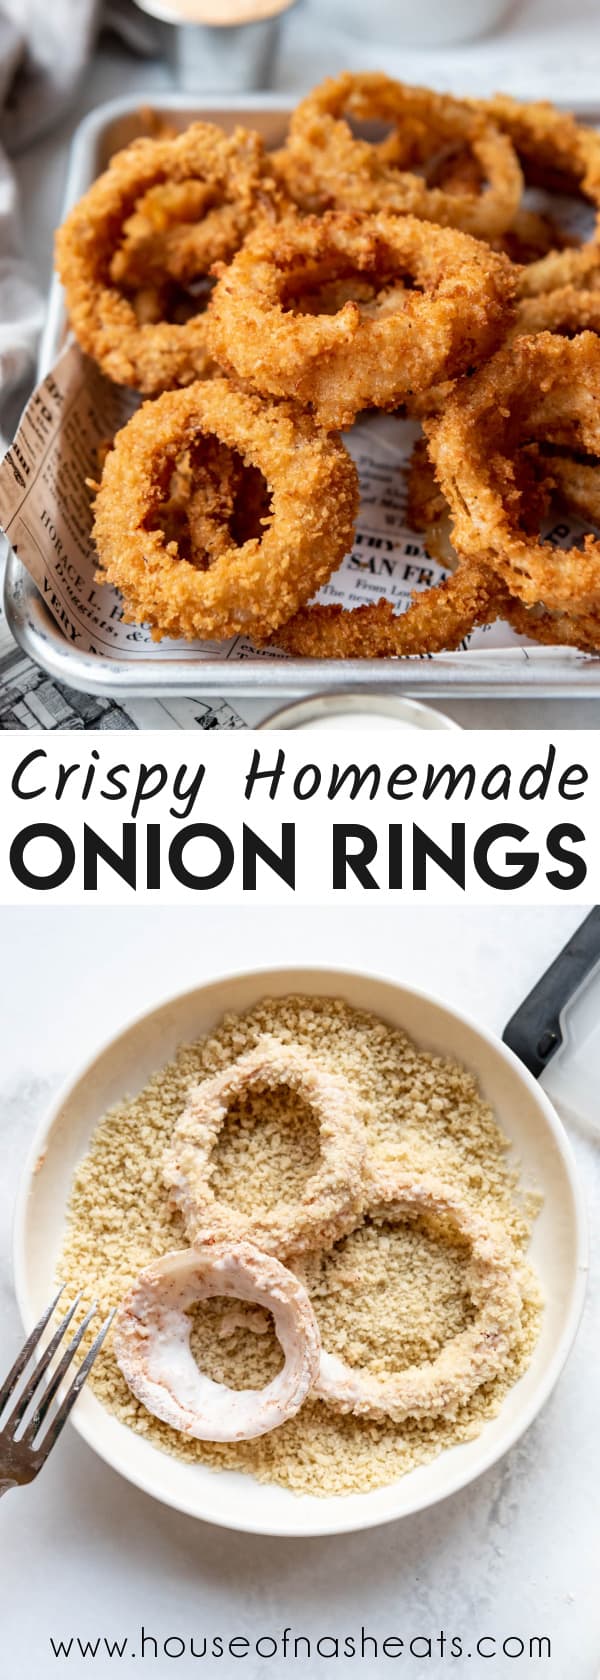 A collage of images of onion rings with text overlay.